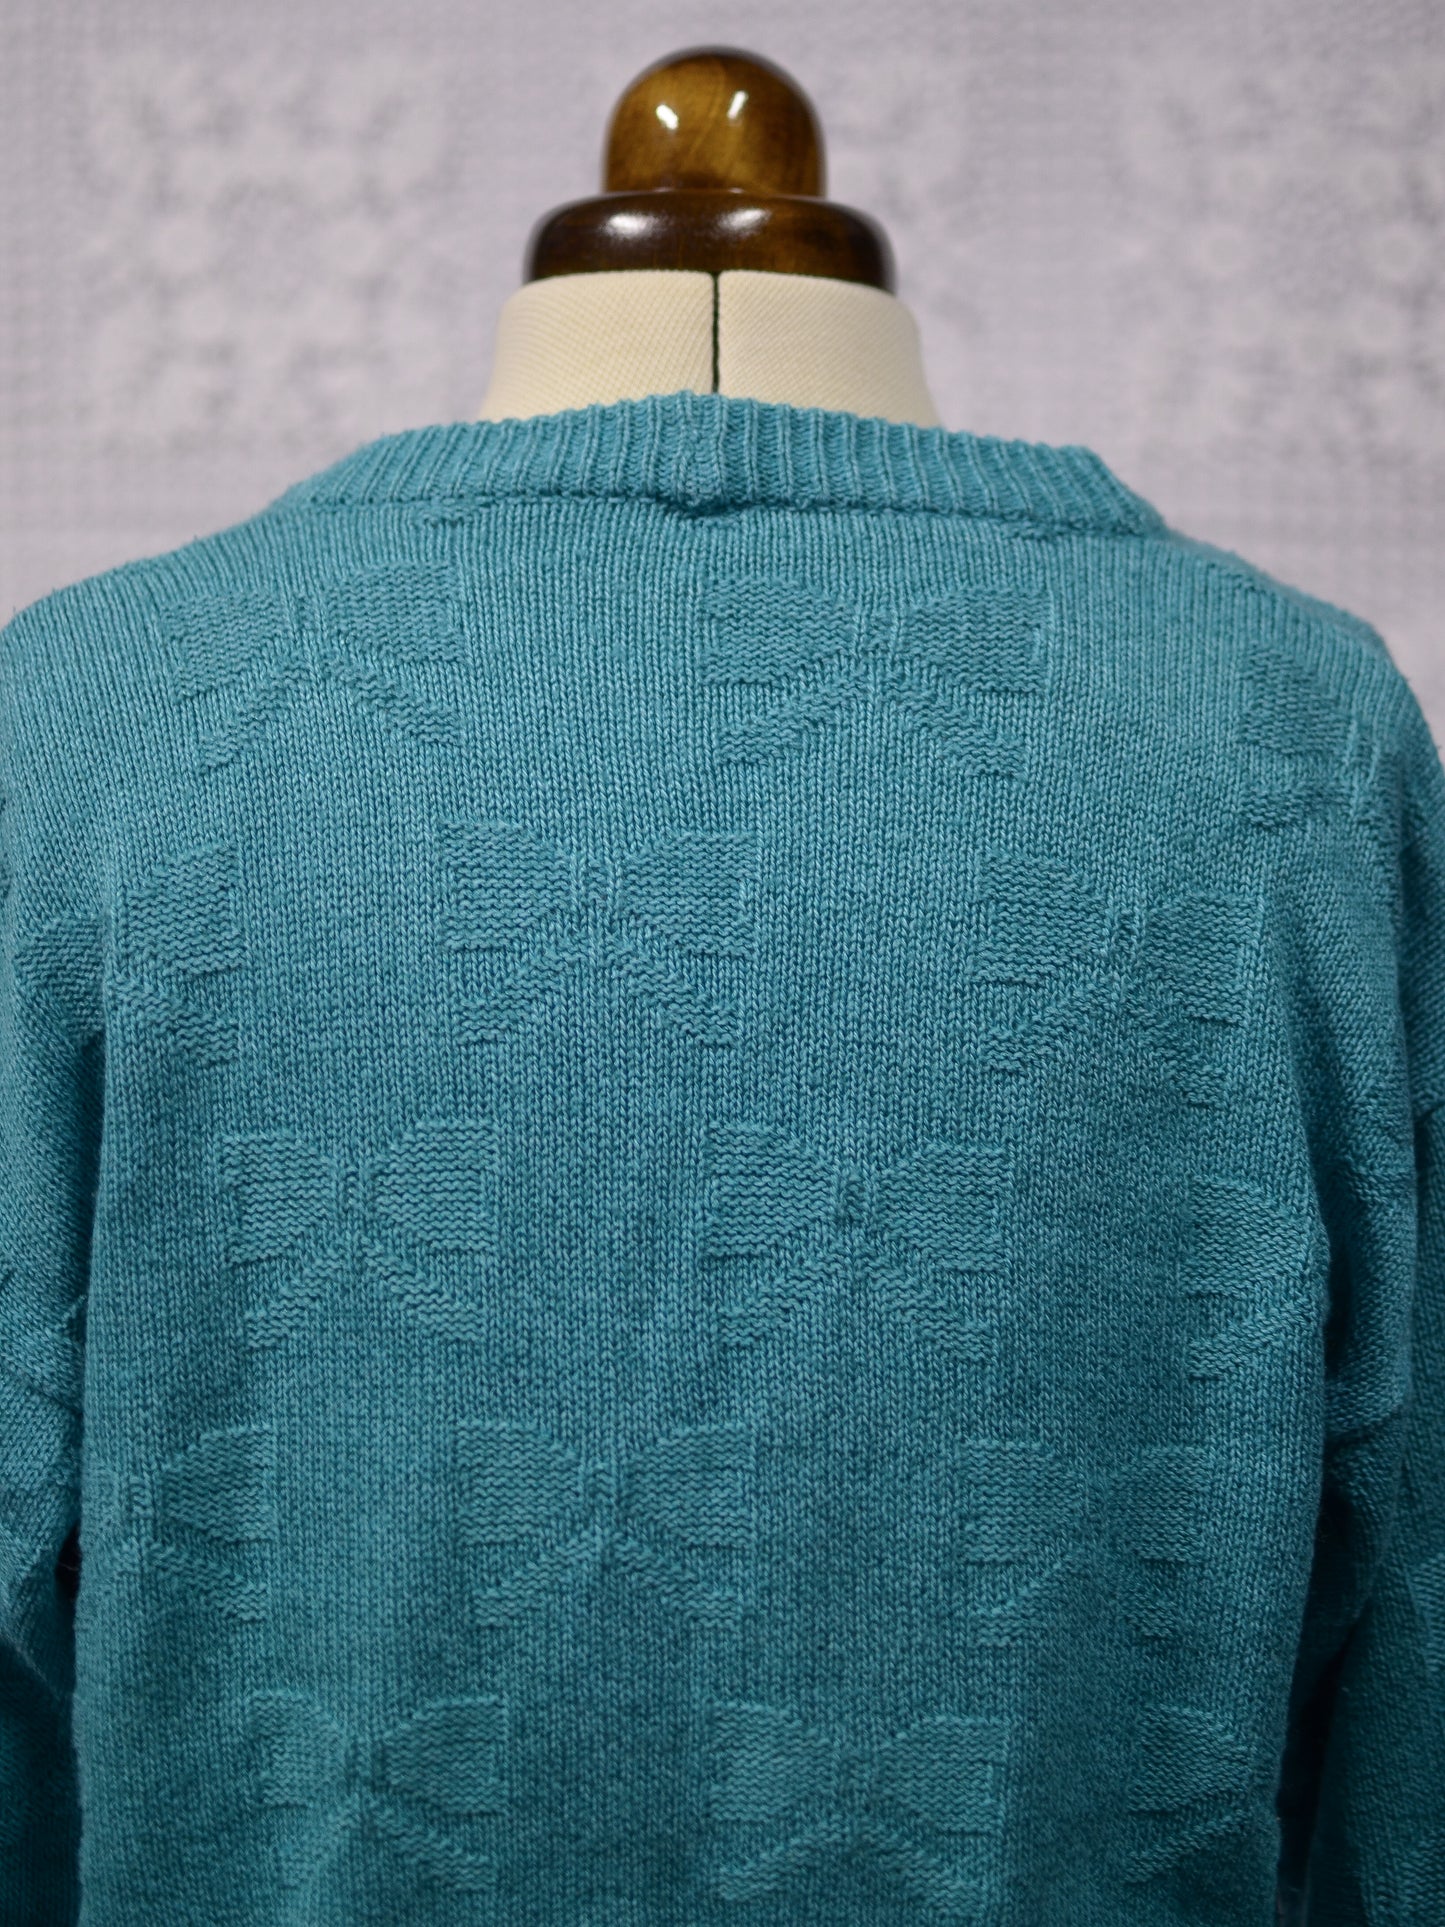 1980s turquoise green bow patterned slouchy v-neck cardigan